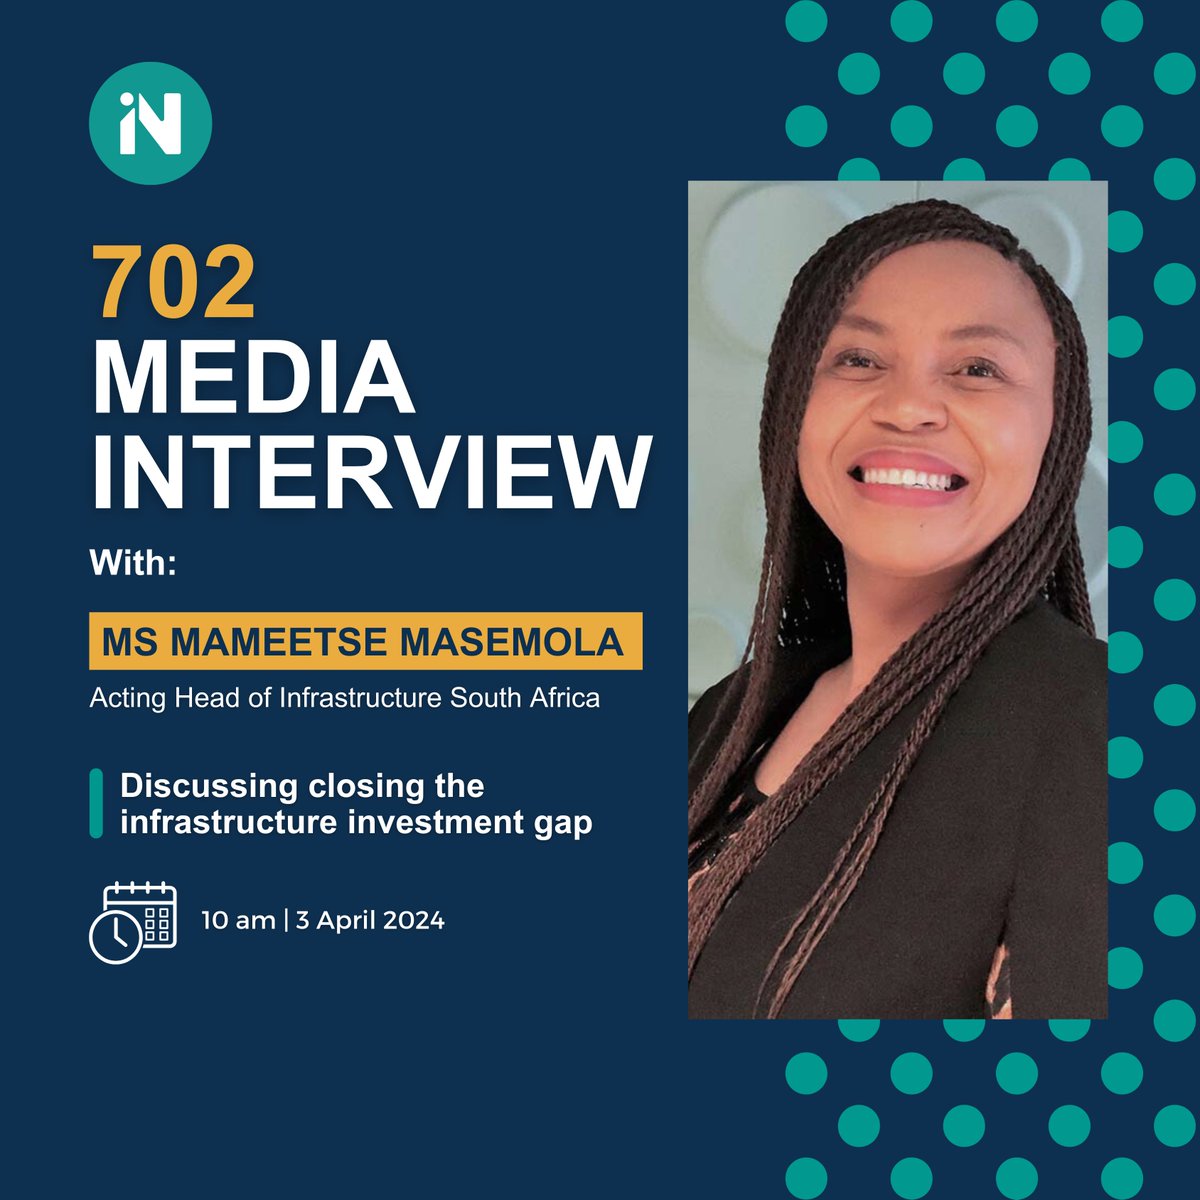 MEDIA INTERVIEW | Acting Head of Infrastructure South Africa Ms Mameetse Masemola will be on 702 at 10 am today (3 April) discussing the infrastructure investment gap on the #TheCMShow. Tune in for valuable insights.